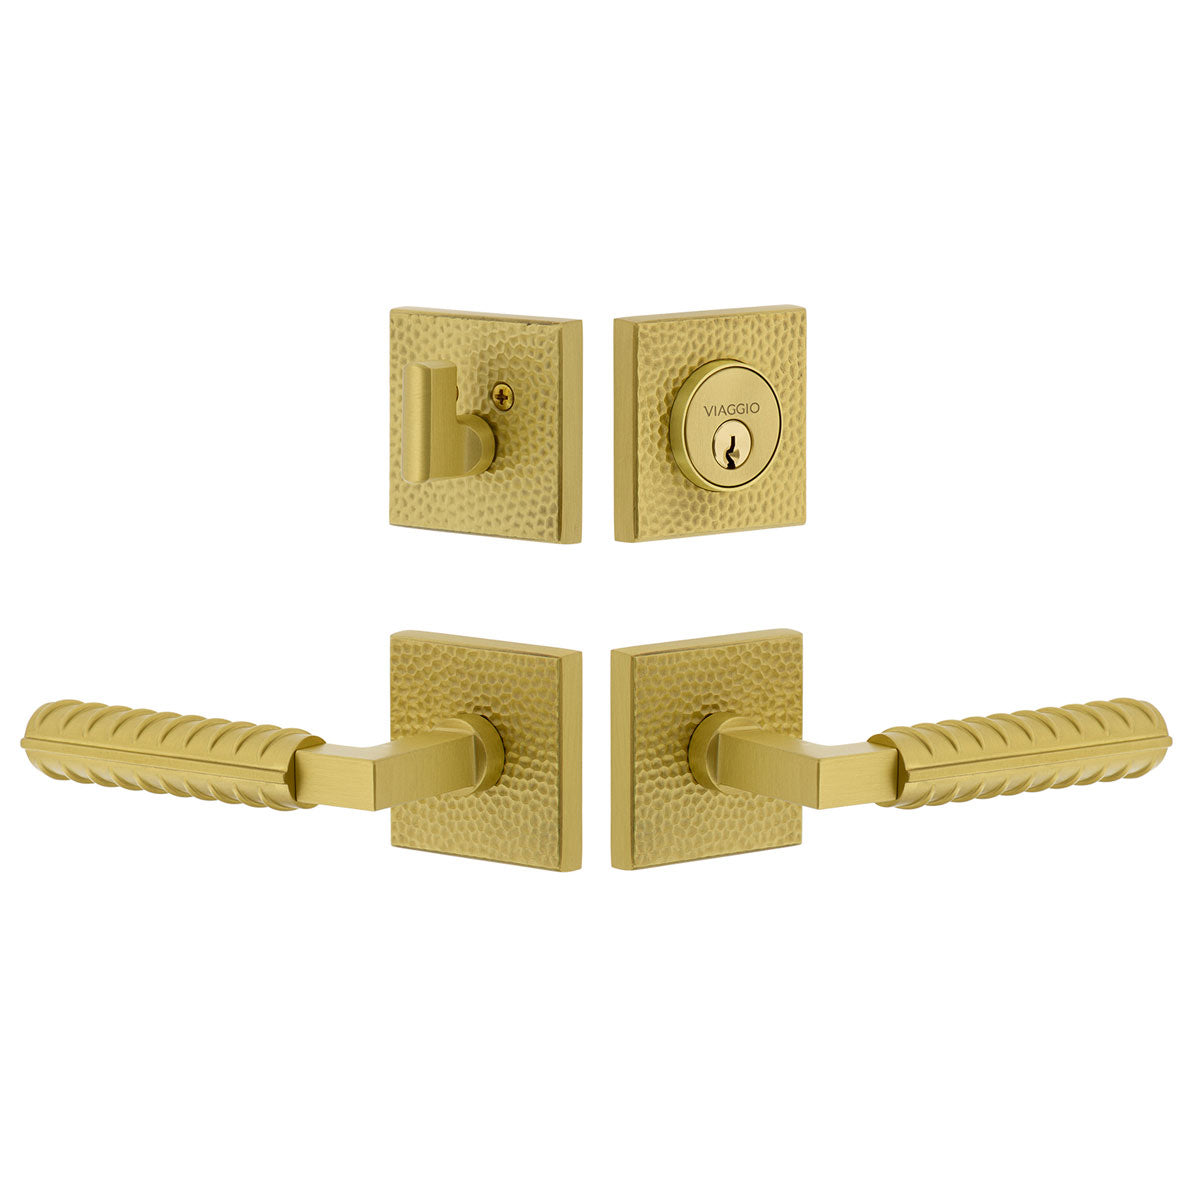 Quadrato Hammered Rosette Entry Set with Contempo Rebar Lever in Satin Brass